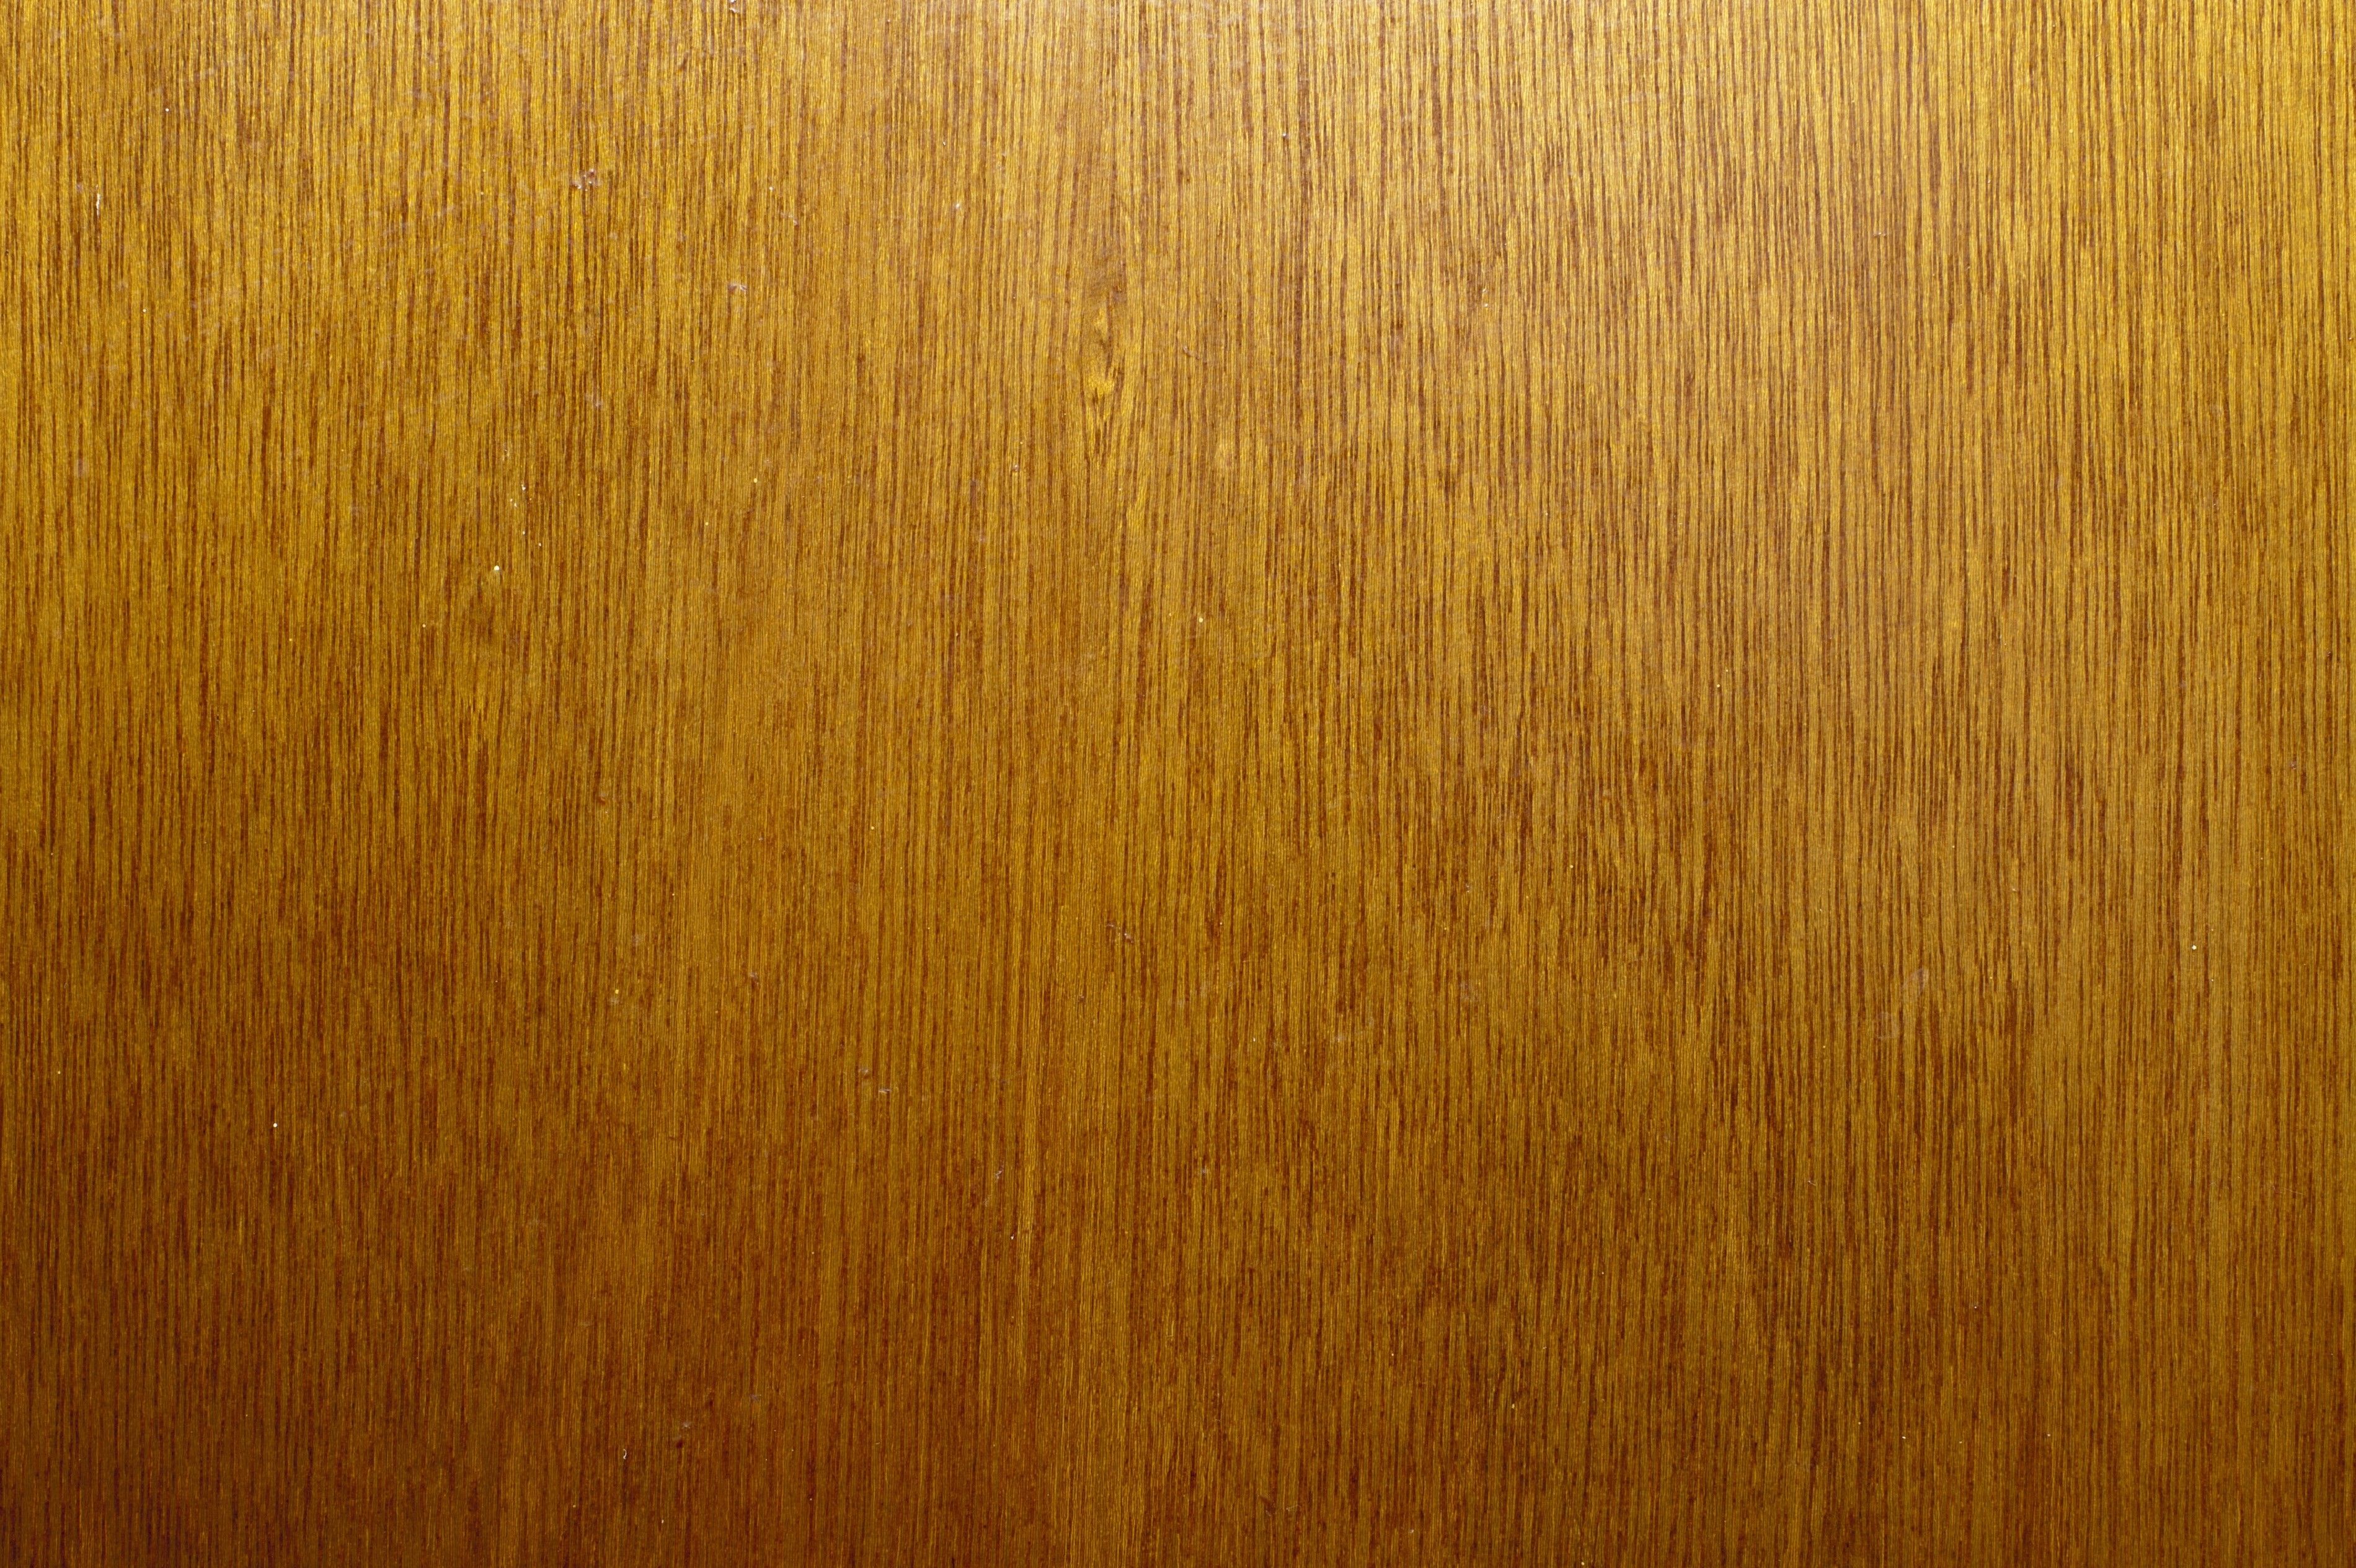 mahogany wood grain. Free background and textures